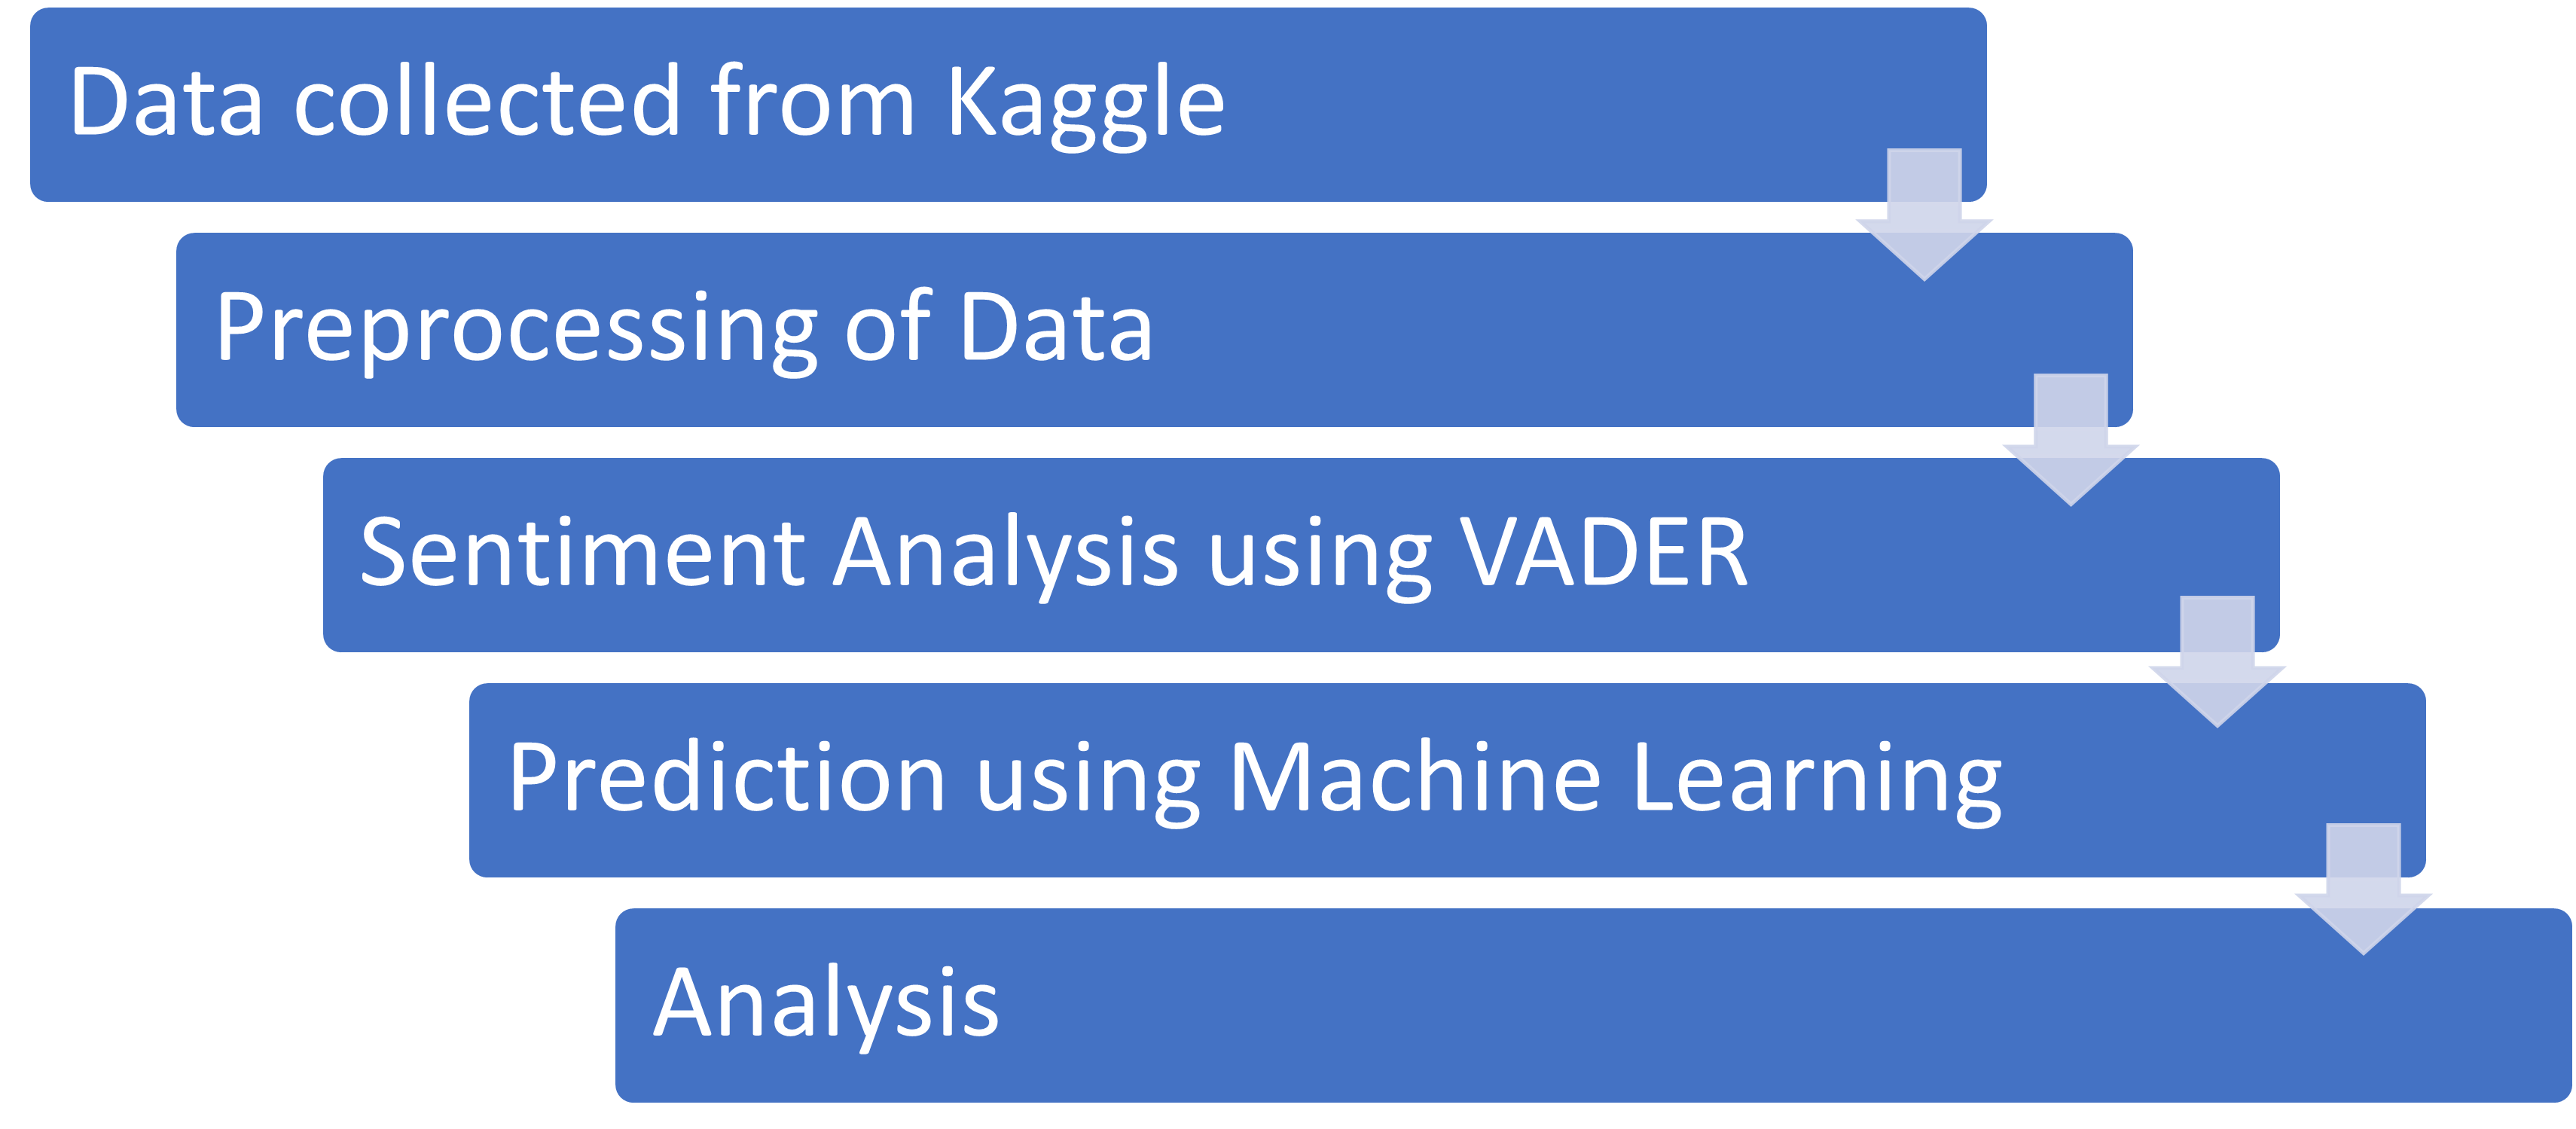 Overview of methodology